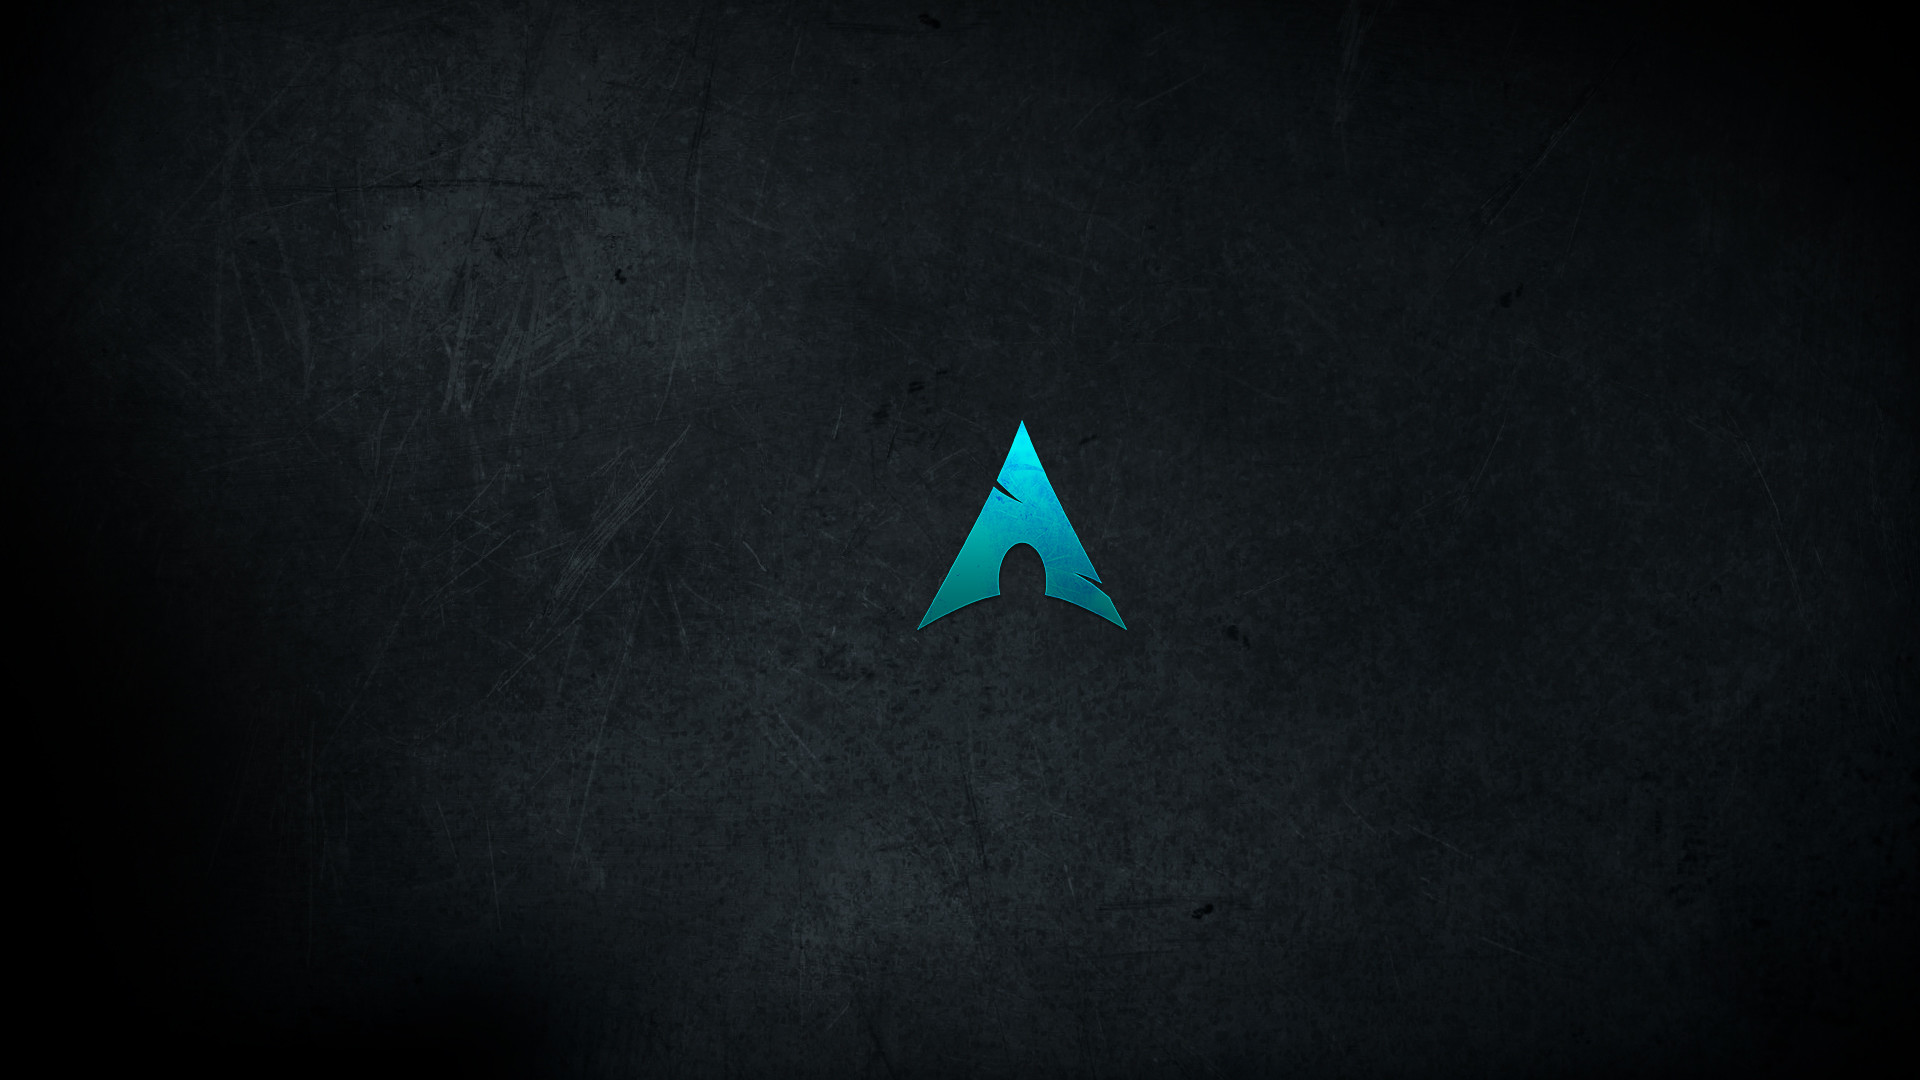 1920x1080 Minimalistic Arch Linux Wallpaper by malkowitch Minimalistic Arch Linux  Wallpaper by malkowitch